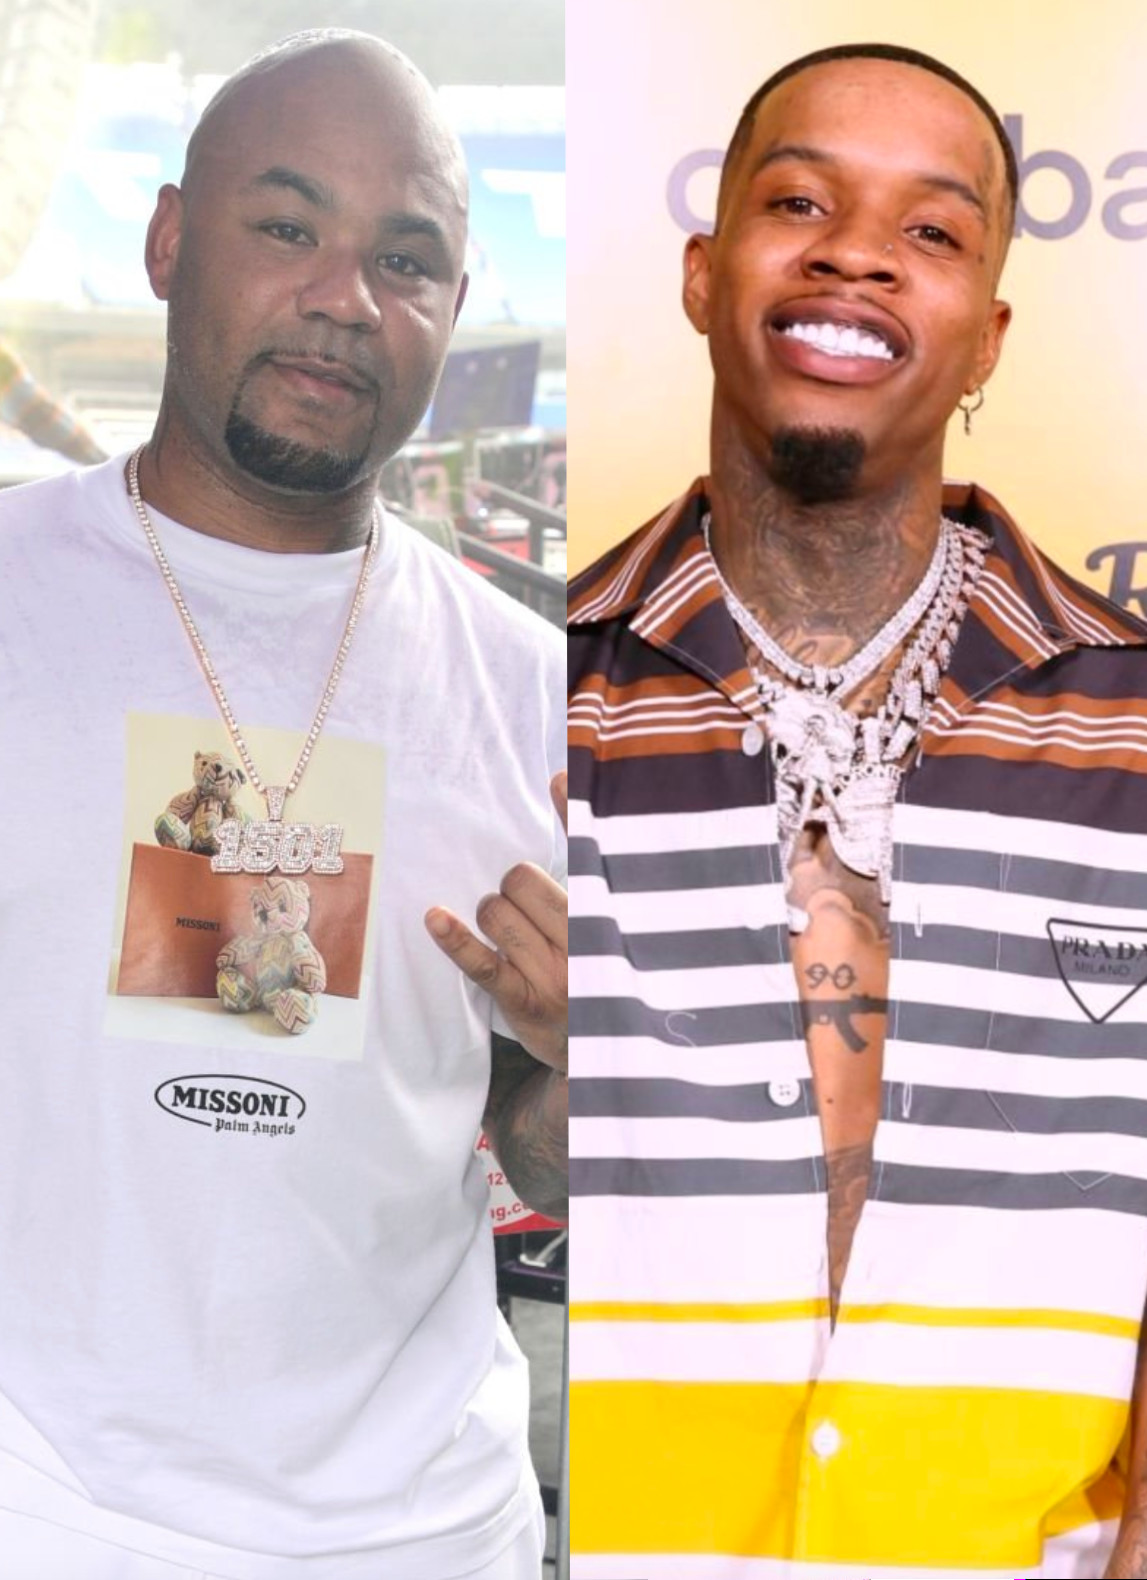 Carl Crawford Posts Video With Tory Lanez, Includes “Protect Black Men” Hashtag